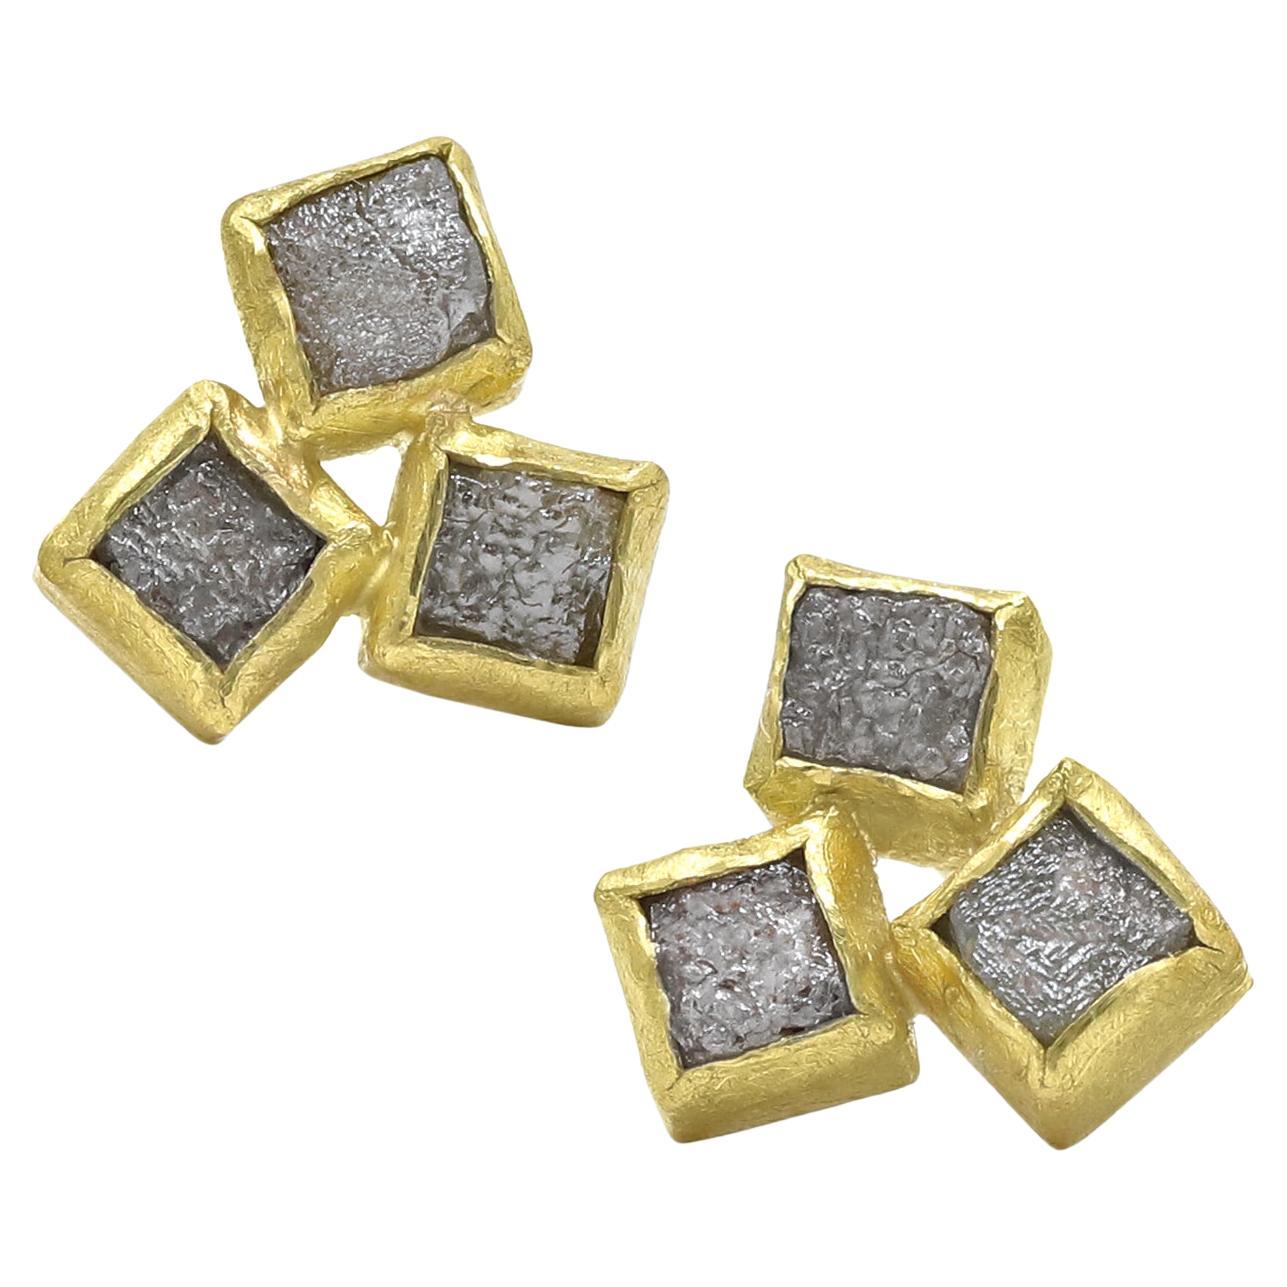 Natural Rough Diamond 22k Yellow Gold Triple Stone Stud Earrings, Petra Class For Sale